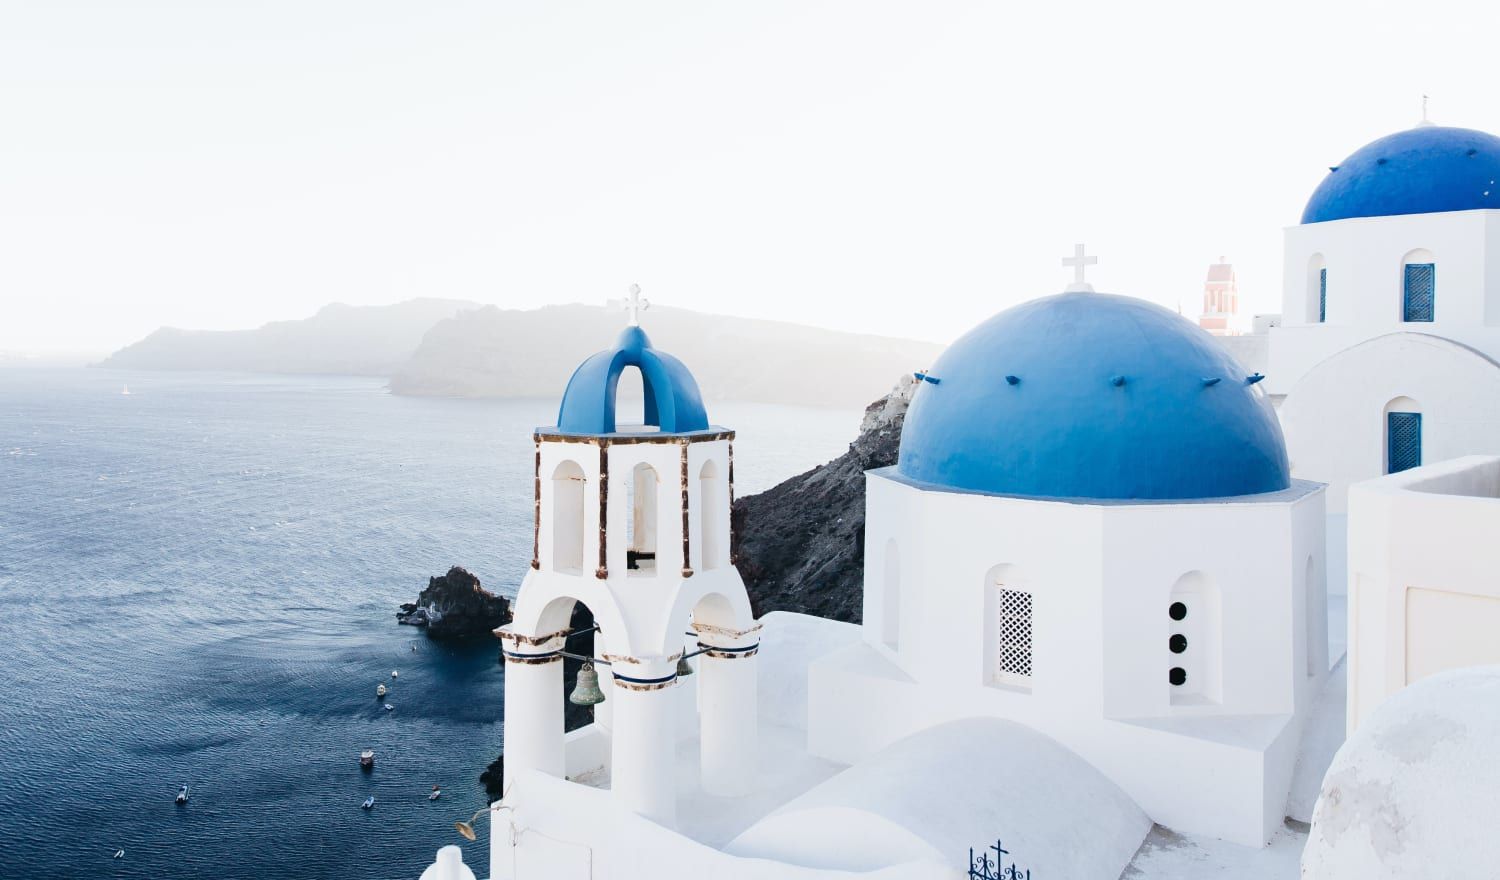 Stunning views overlooking the white and blue domes of Santorini